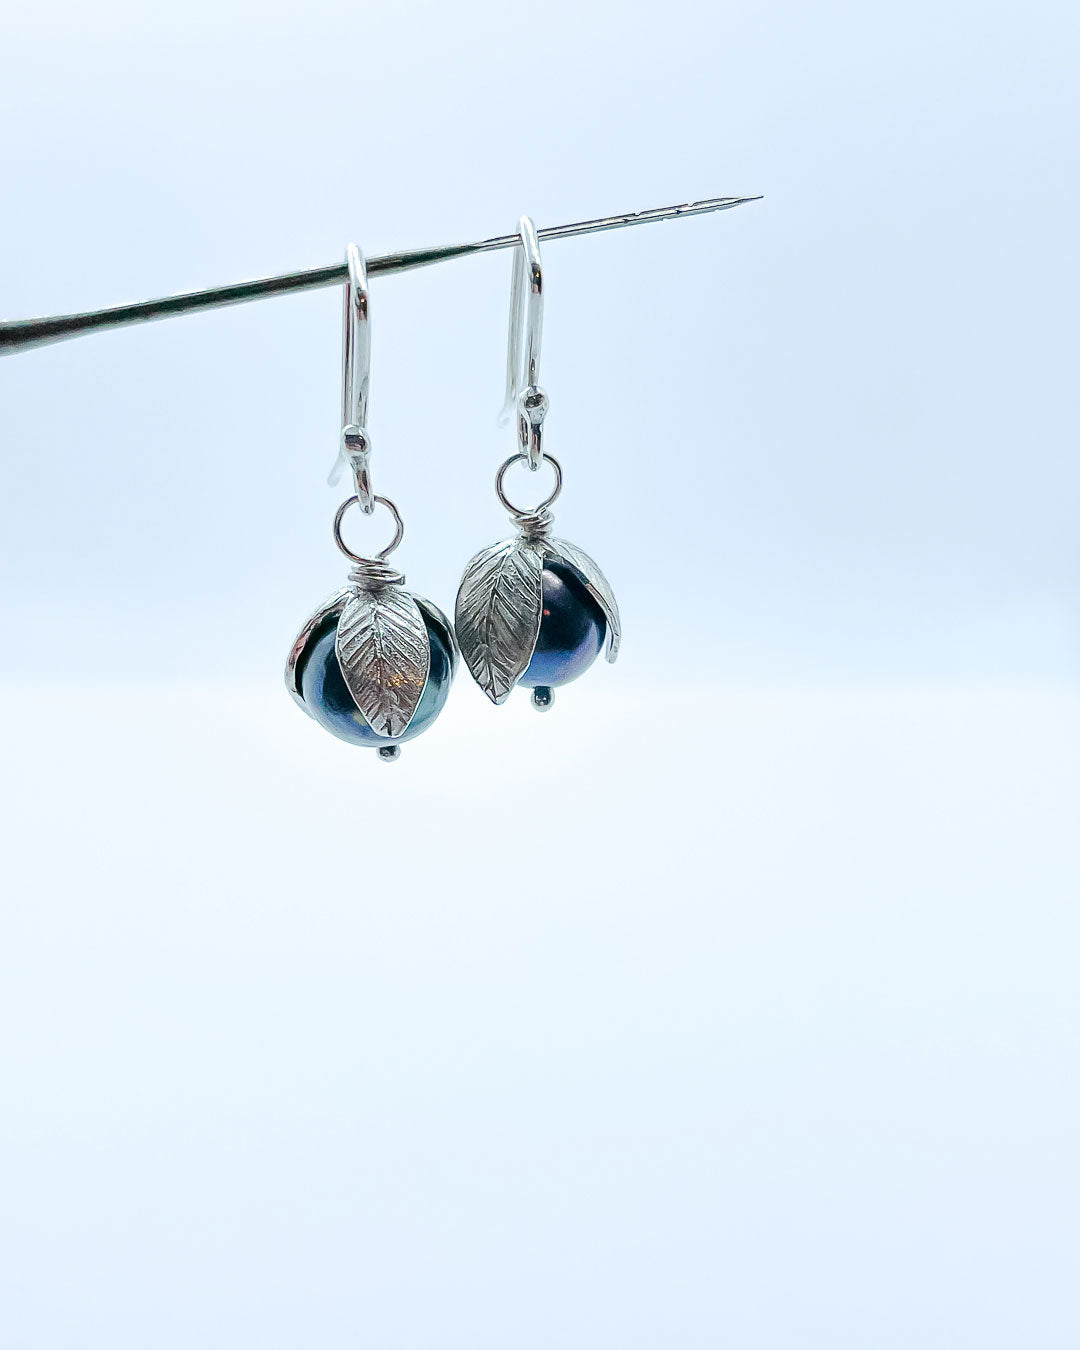 A pair of black pearls topped with Stylised leaves hung from artisan earring hooks hanging from a metal pin